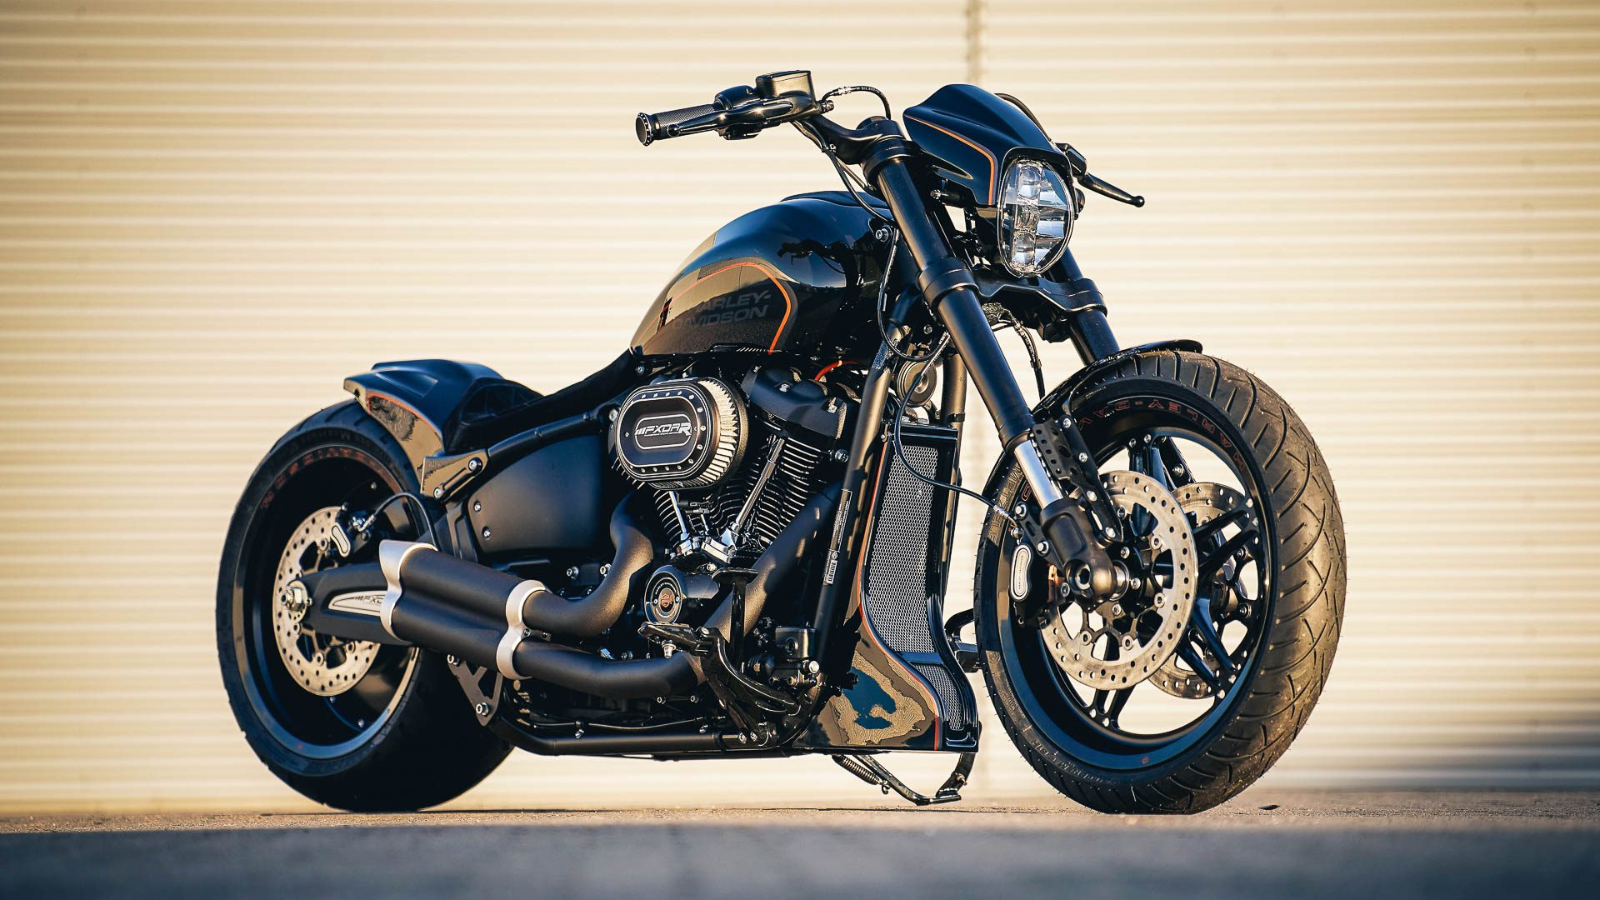 2019 FXDR 114 Customized by Thunderbike | Hdforums